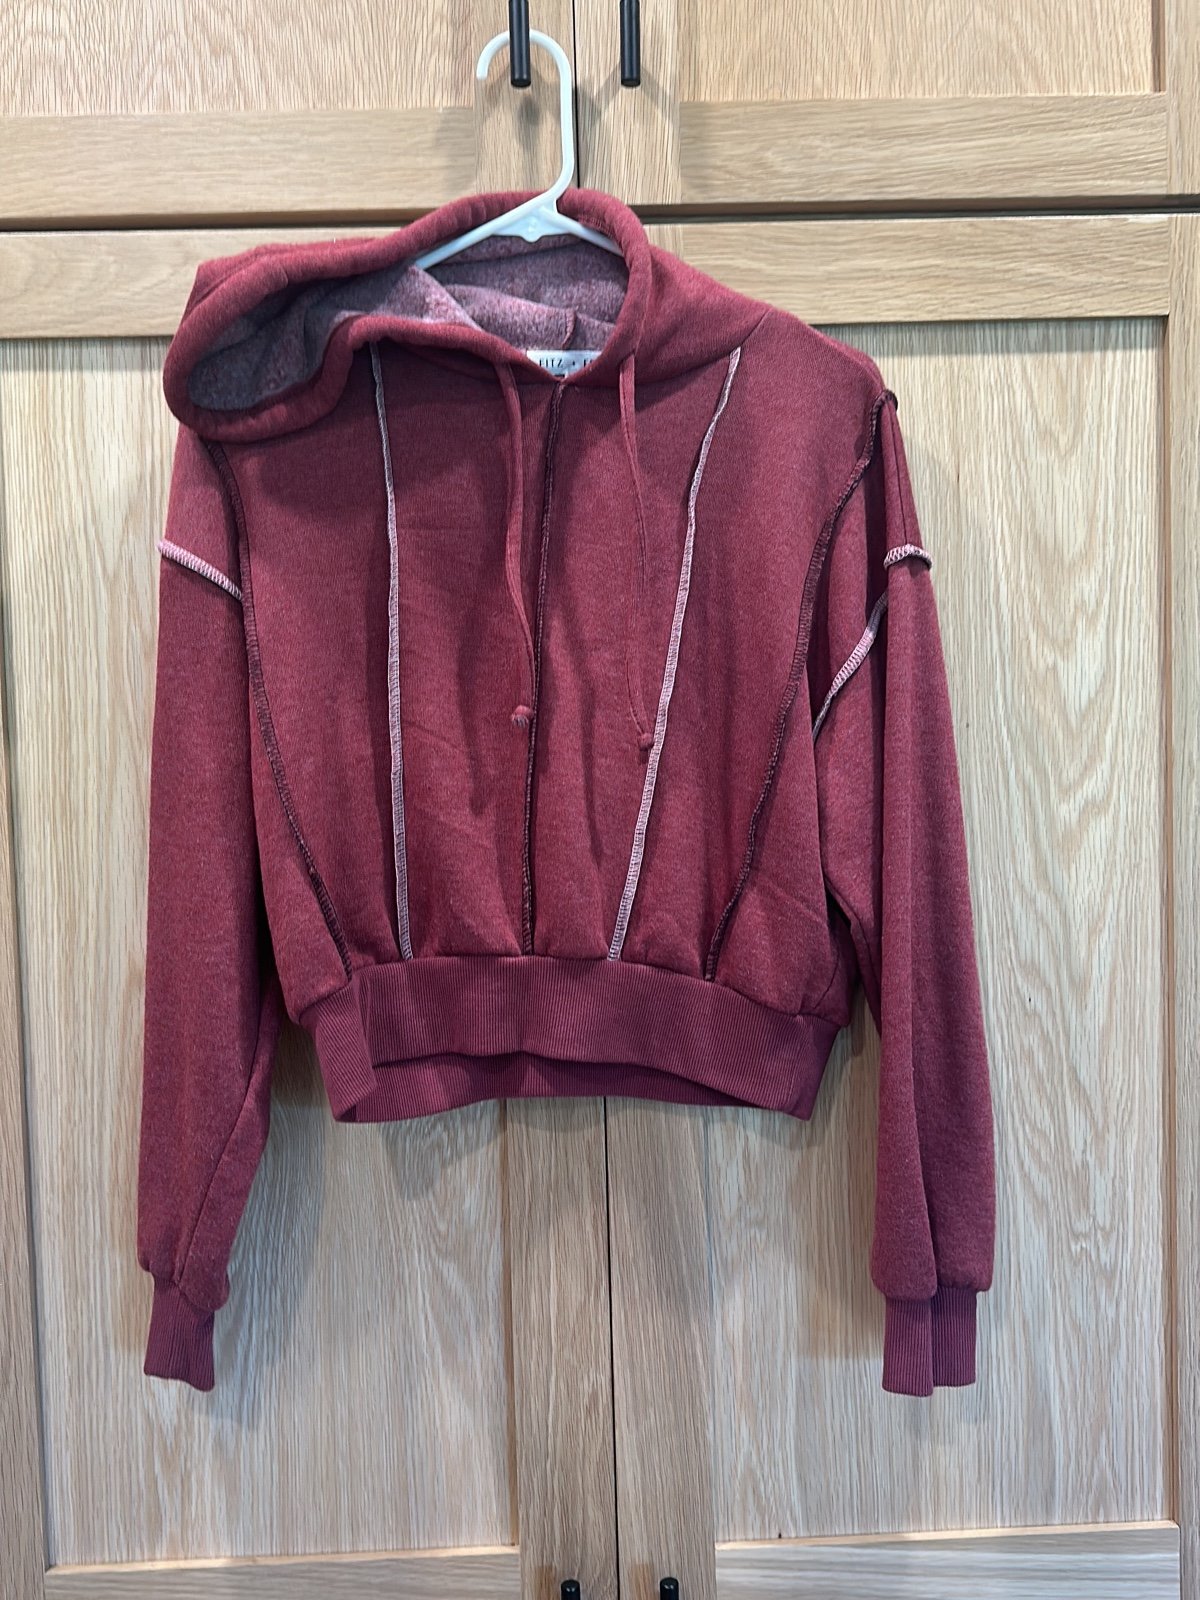 Affordable Cropped Hoodie i4DWUlqbd Counter Genuine 